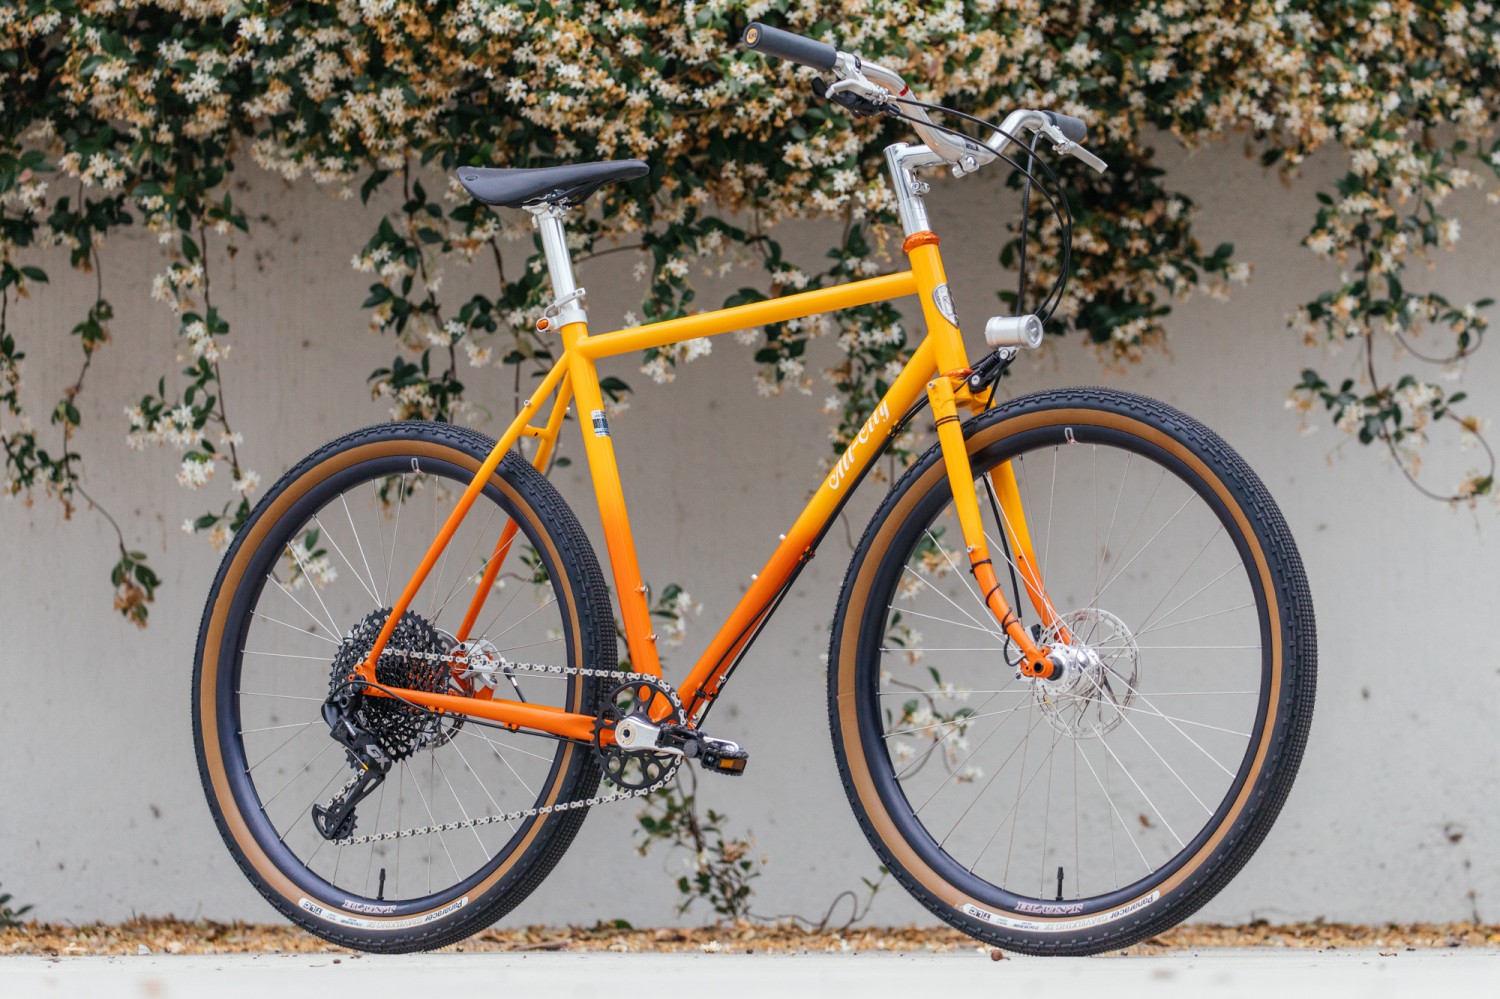 A bicycle with yellow frame